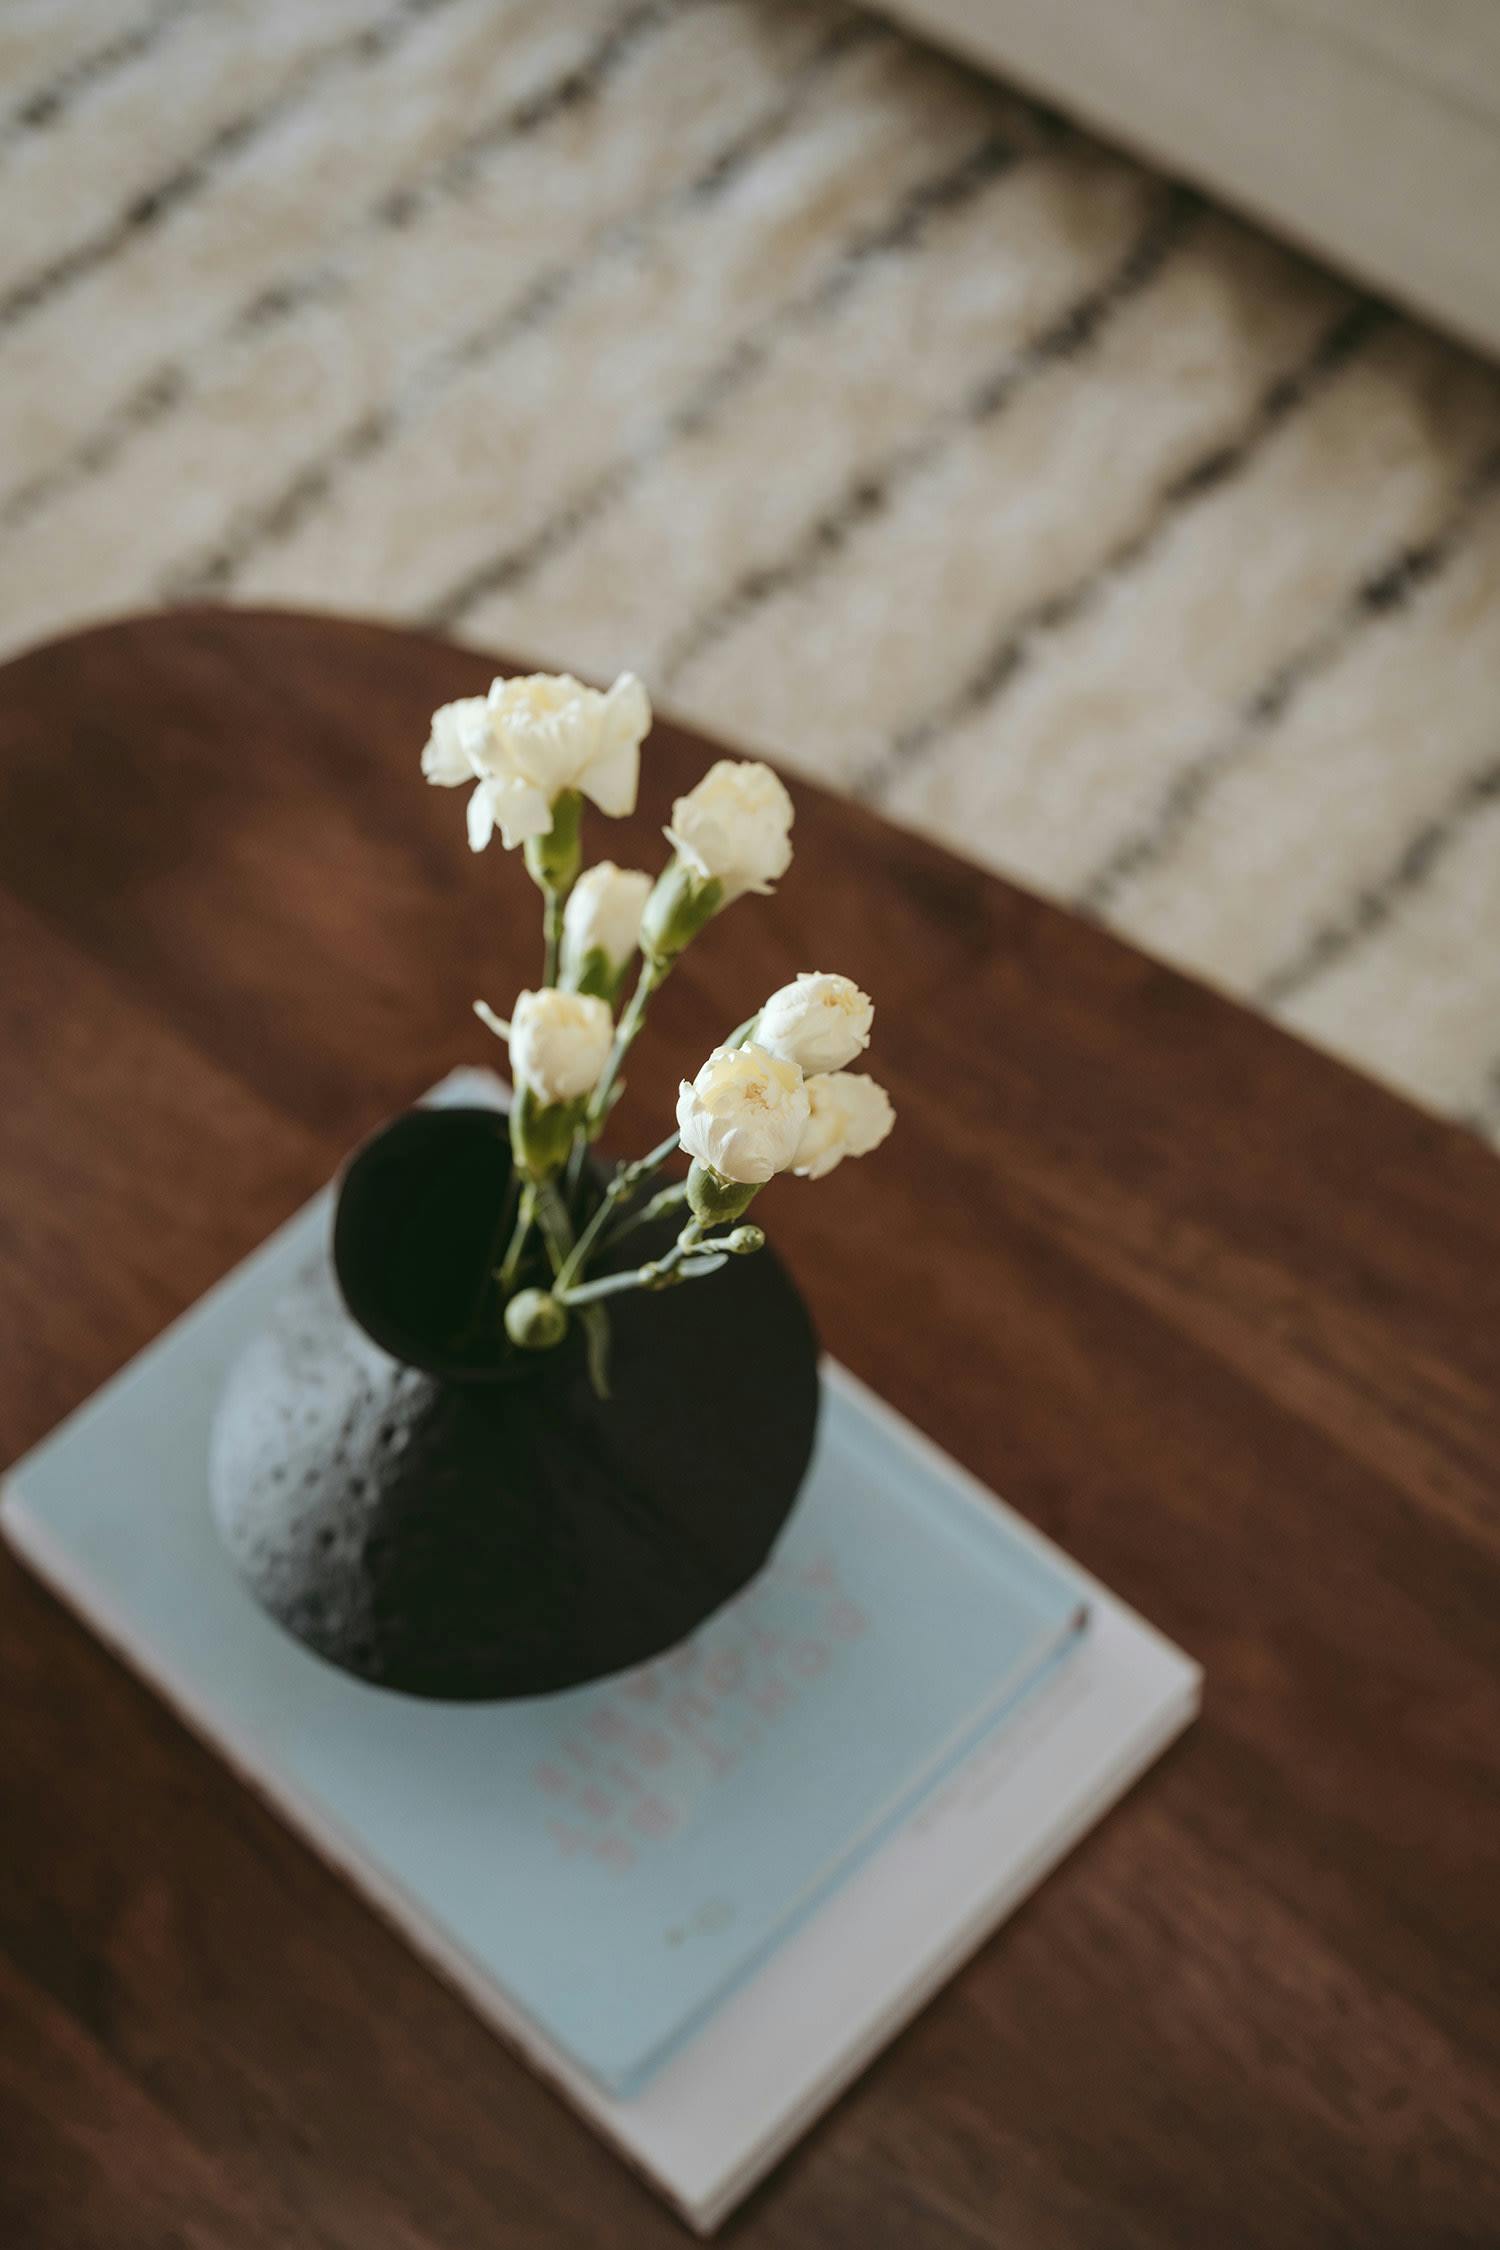 A small vase with white flowers is placed on a table, with a book and a small tablecloth nearby.